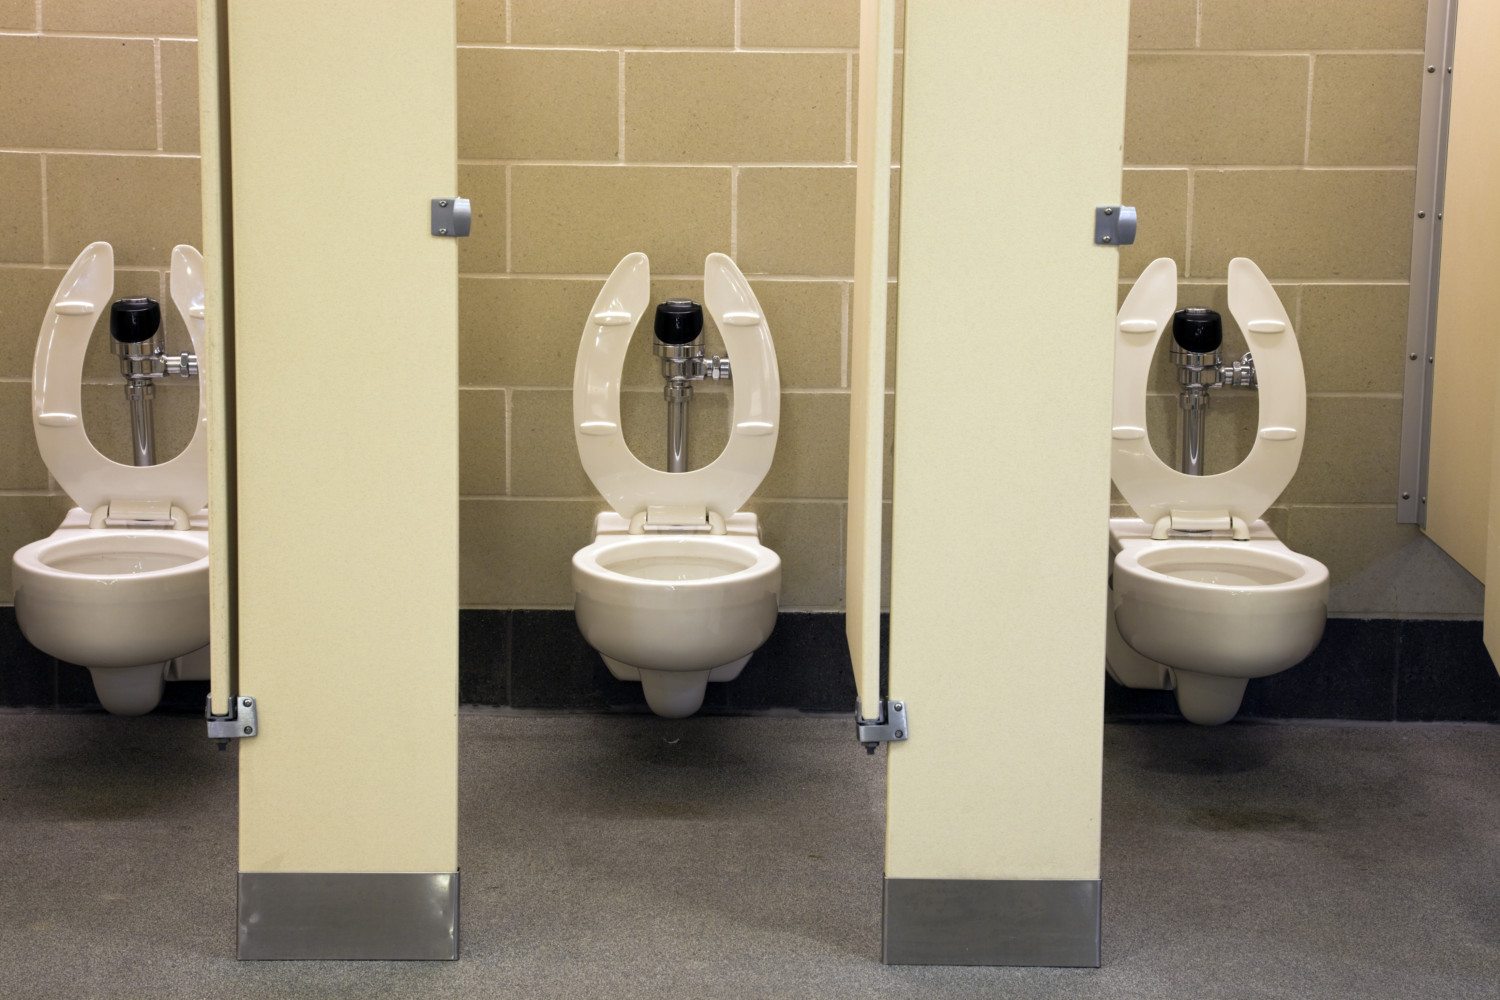 This Is The Real Reason Public Toilet Seats Are U-Shaped.